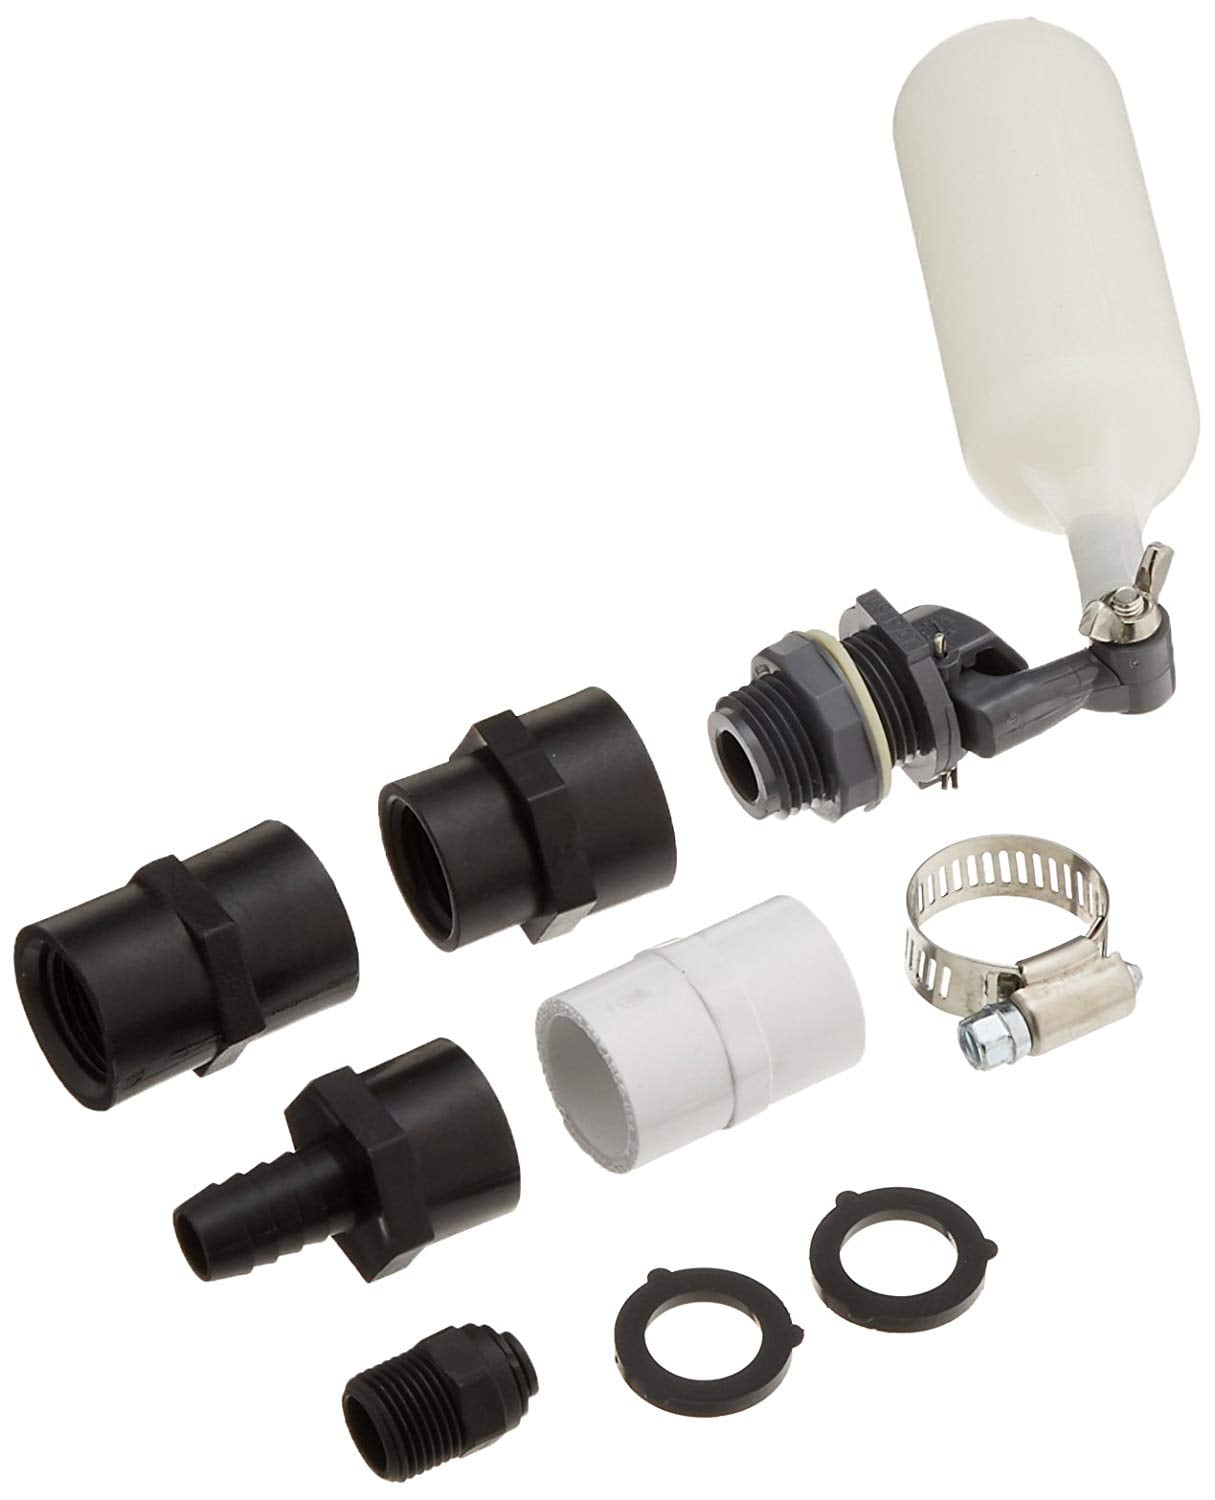 Little Giant® Auto Fill Valve Kit Keep your Pond at Full Water Level! 